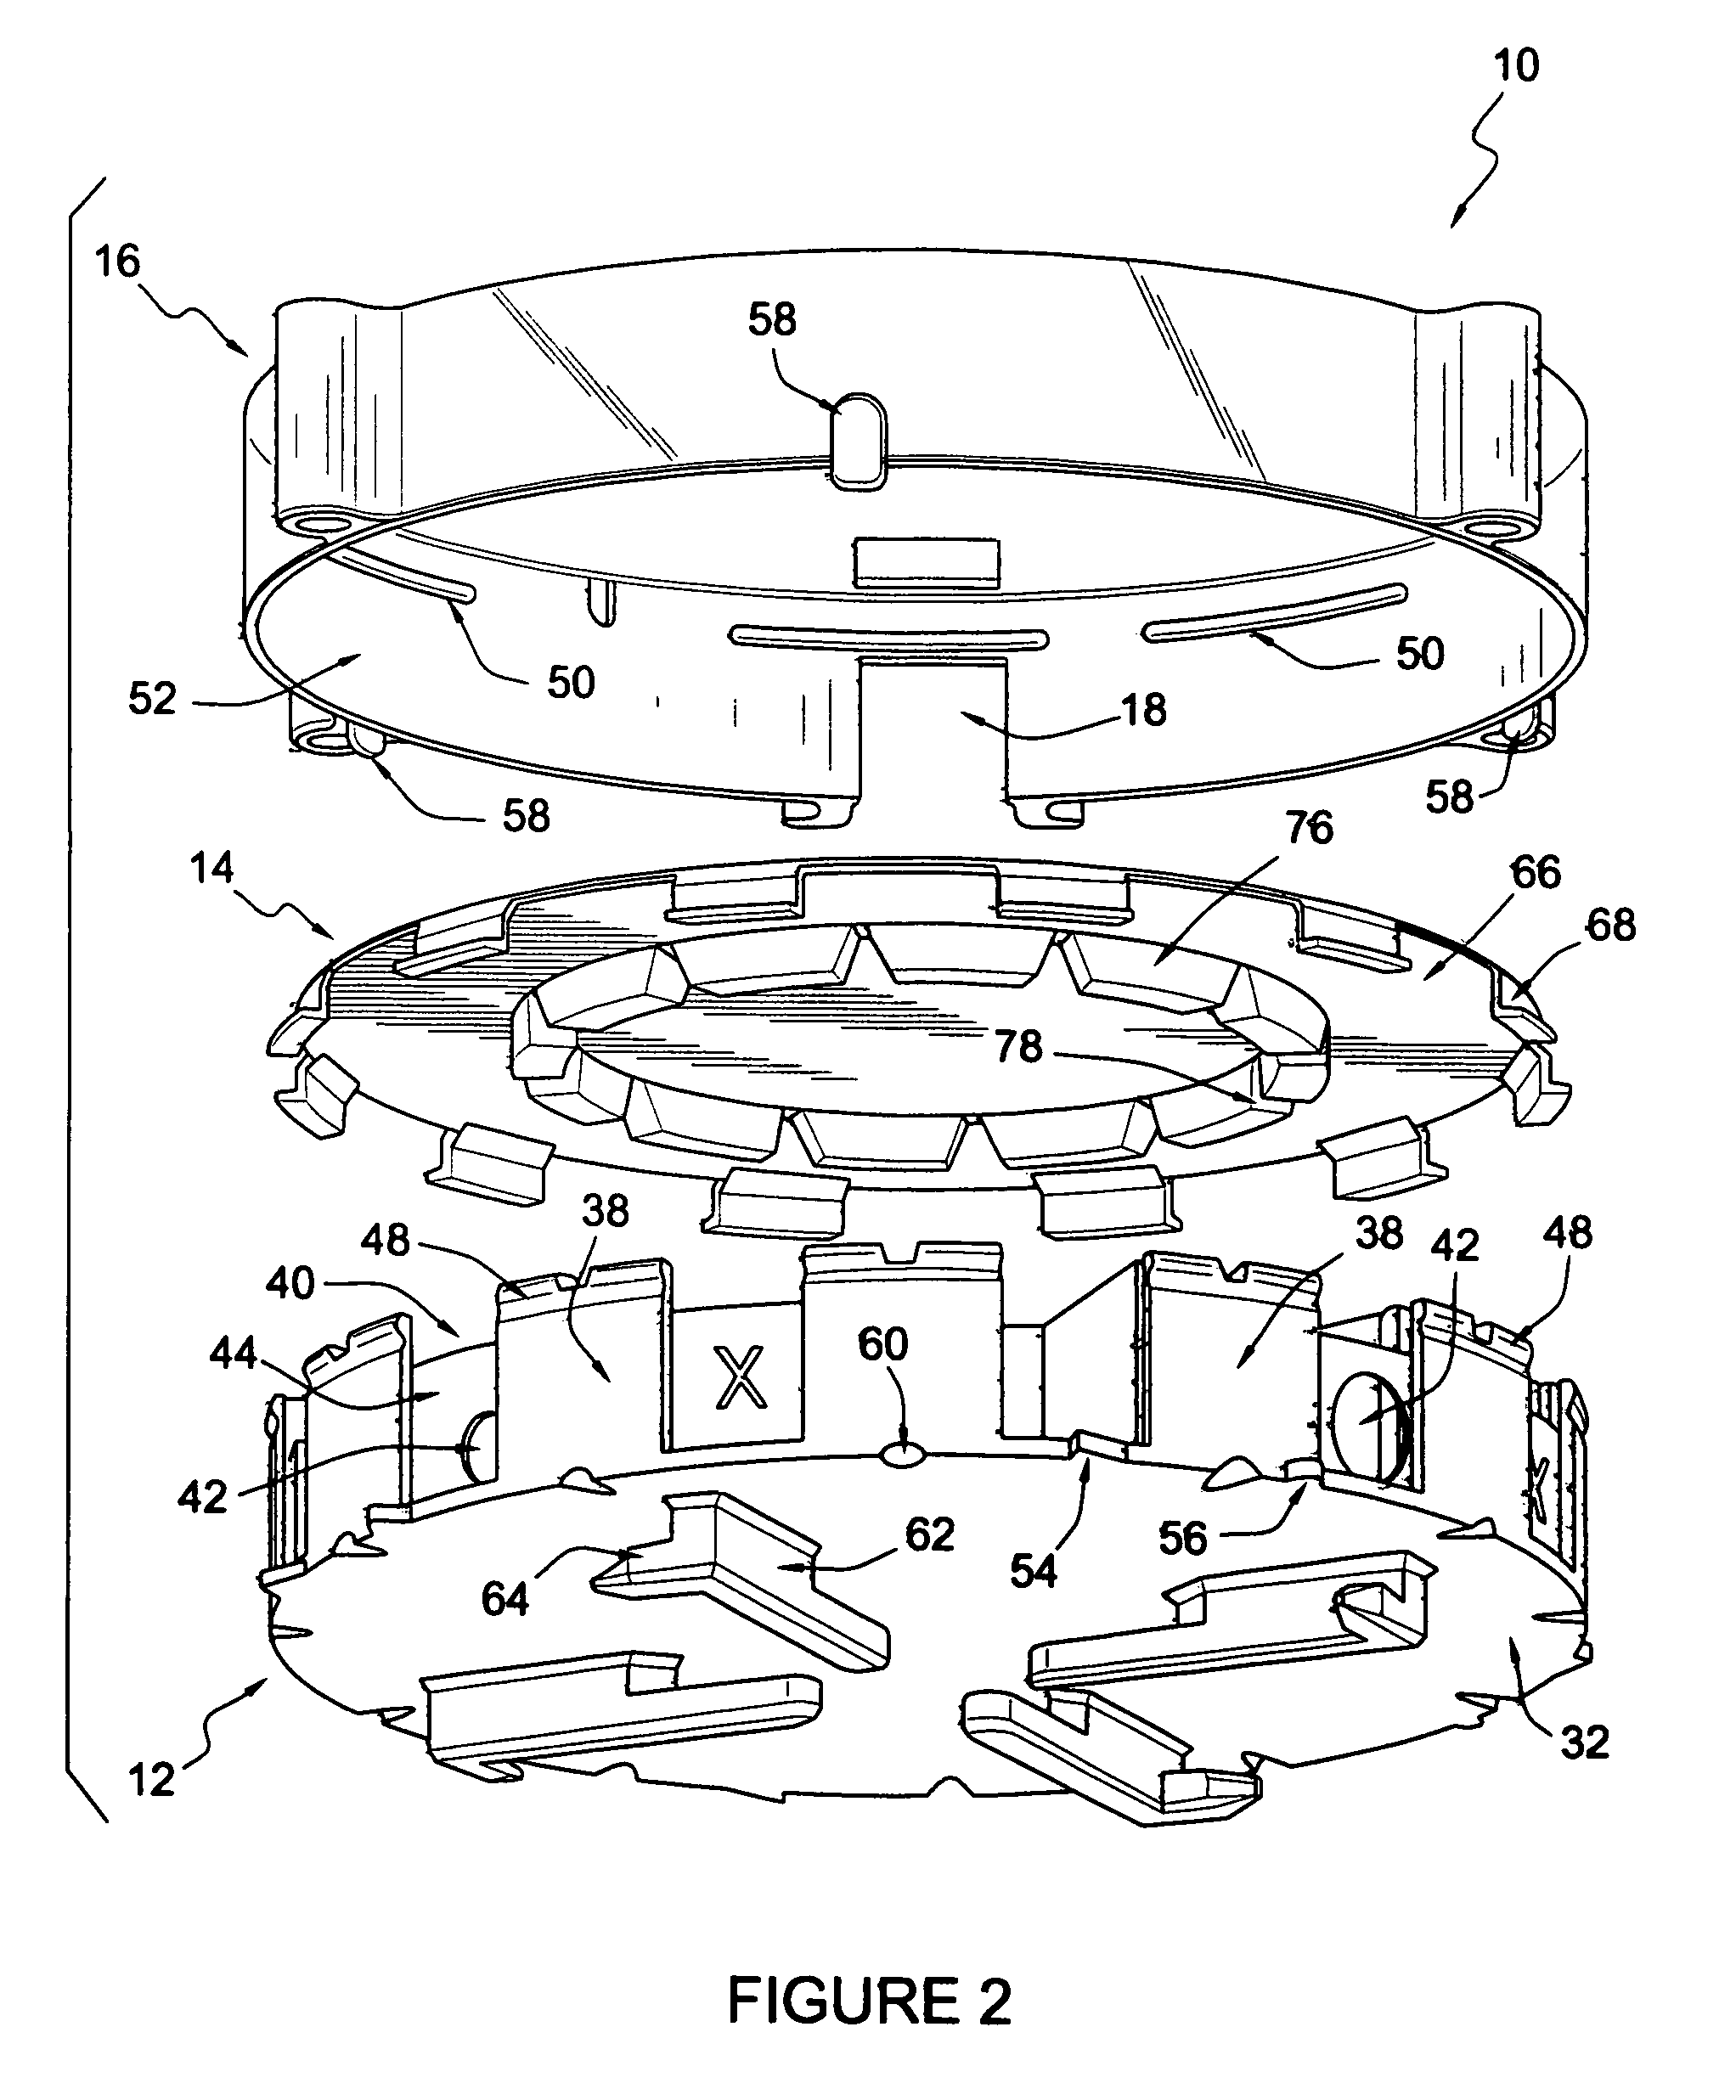 System and method for storing and dispensing medication